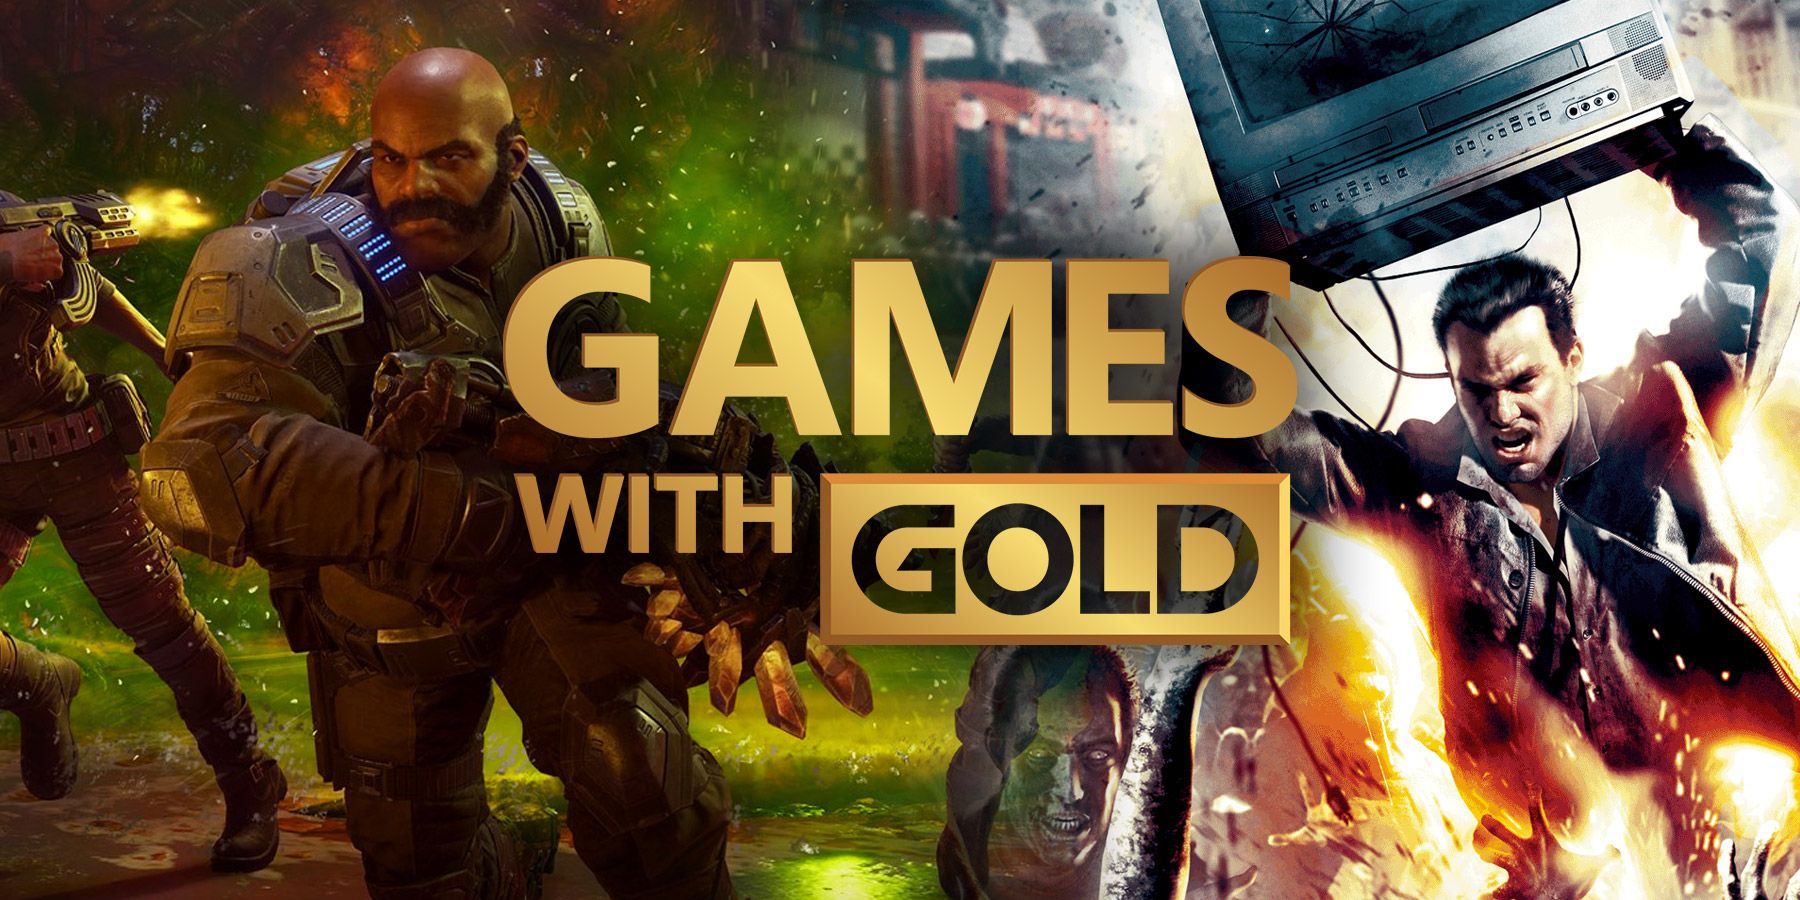 Xbox Games With Gold July 2021 Games – Free Games!